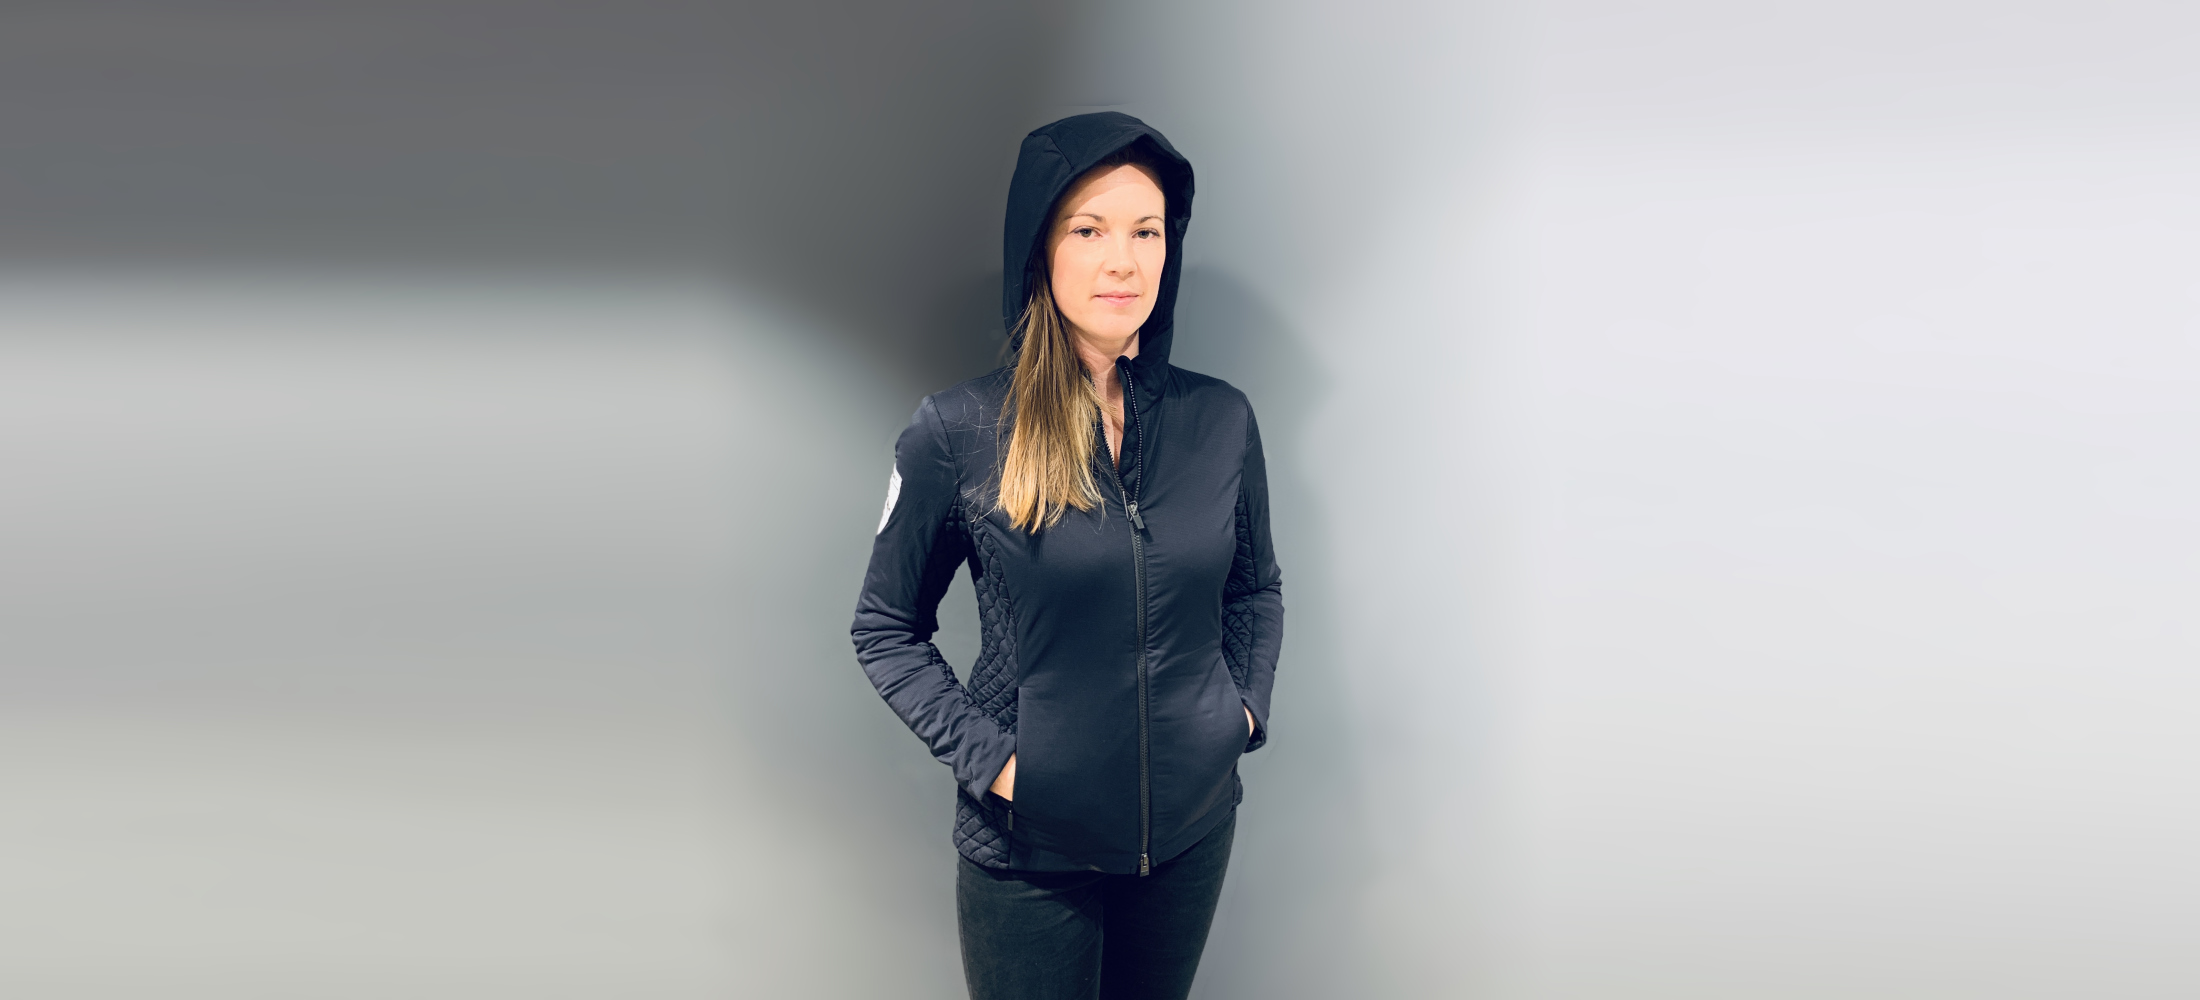 All-season, lightweight, hooded jacket has an understated design and a matte-shiny finish for a unique look. Perfect insulation piece to layer under a shell or to wear on its own.